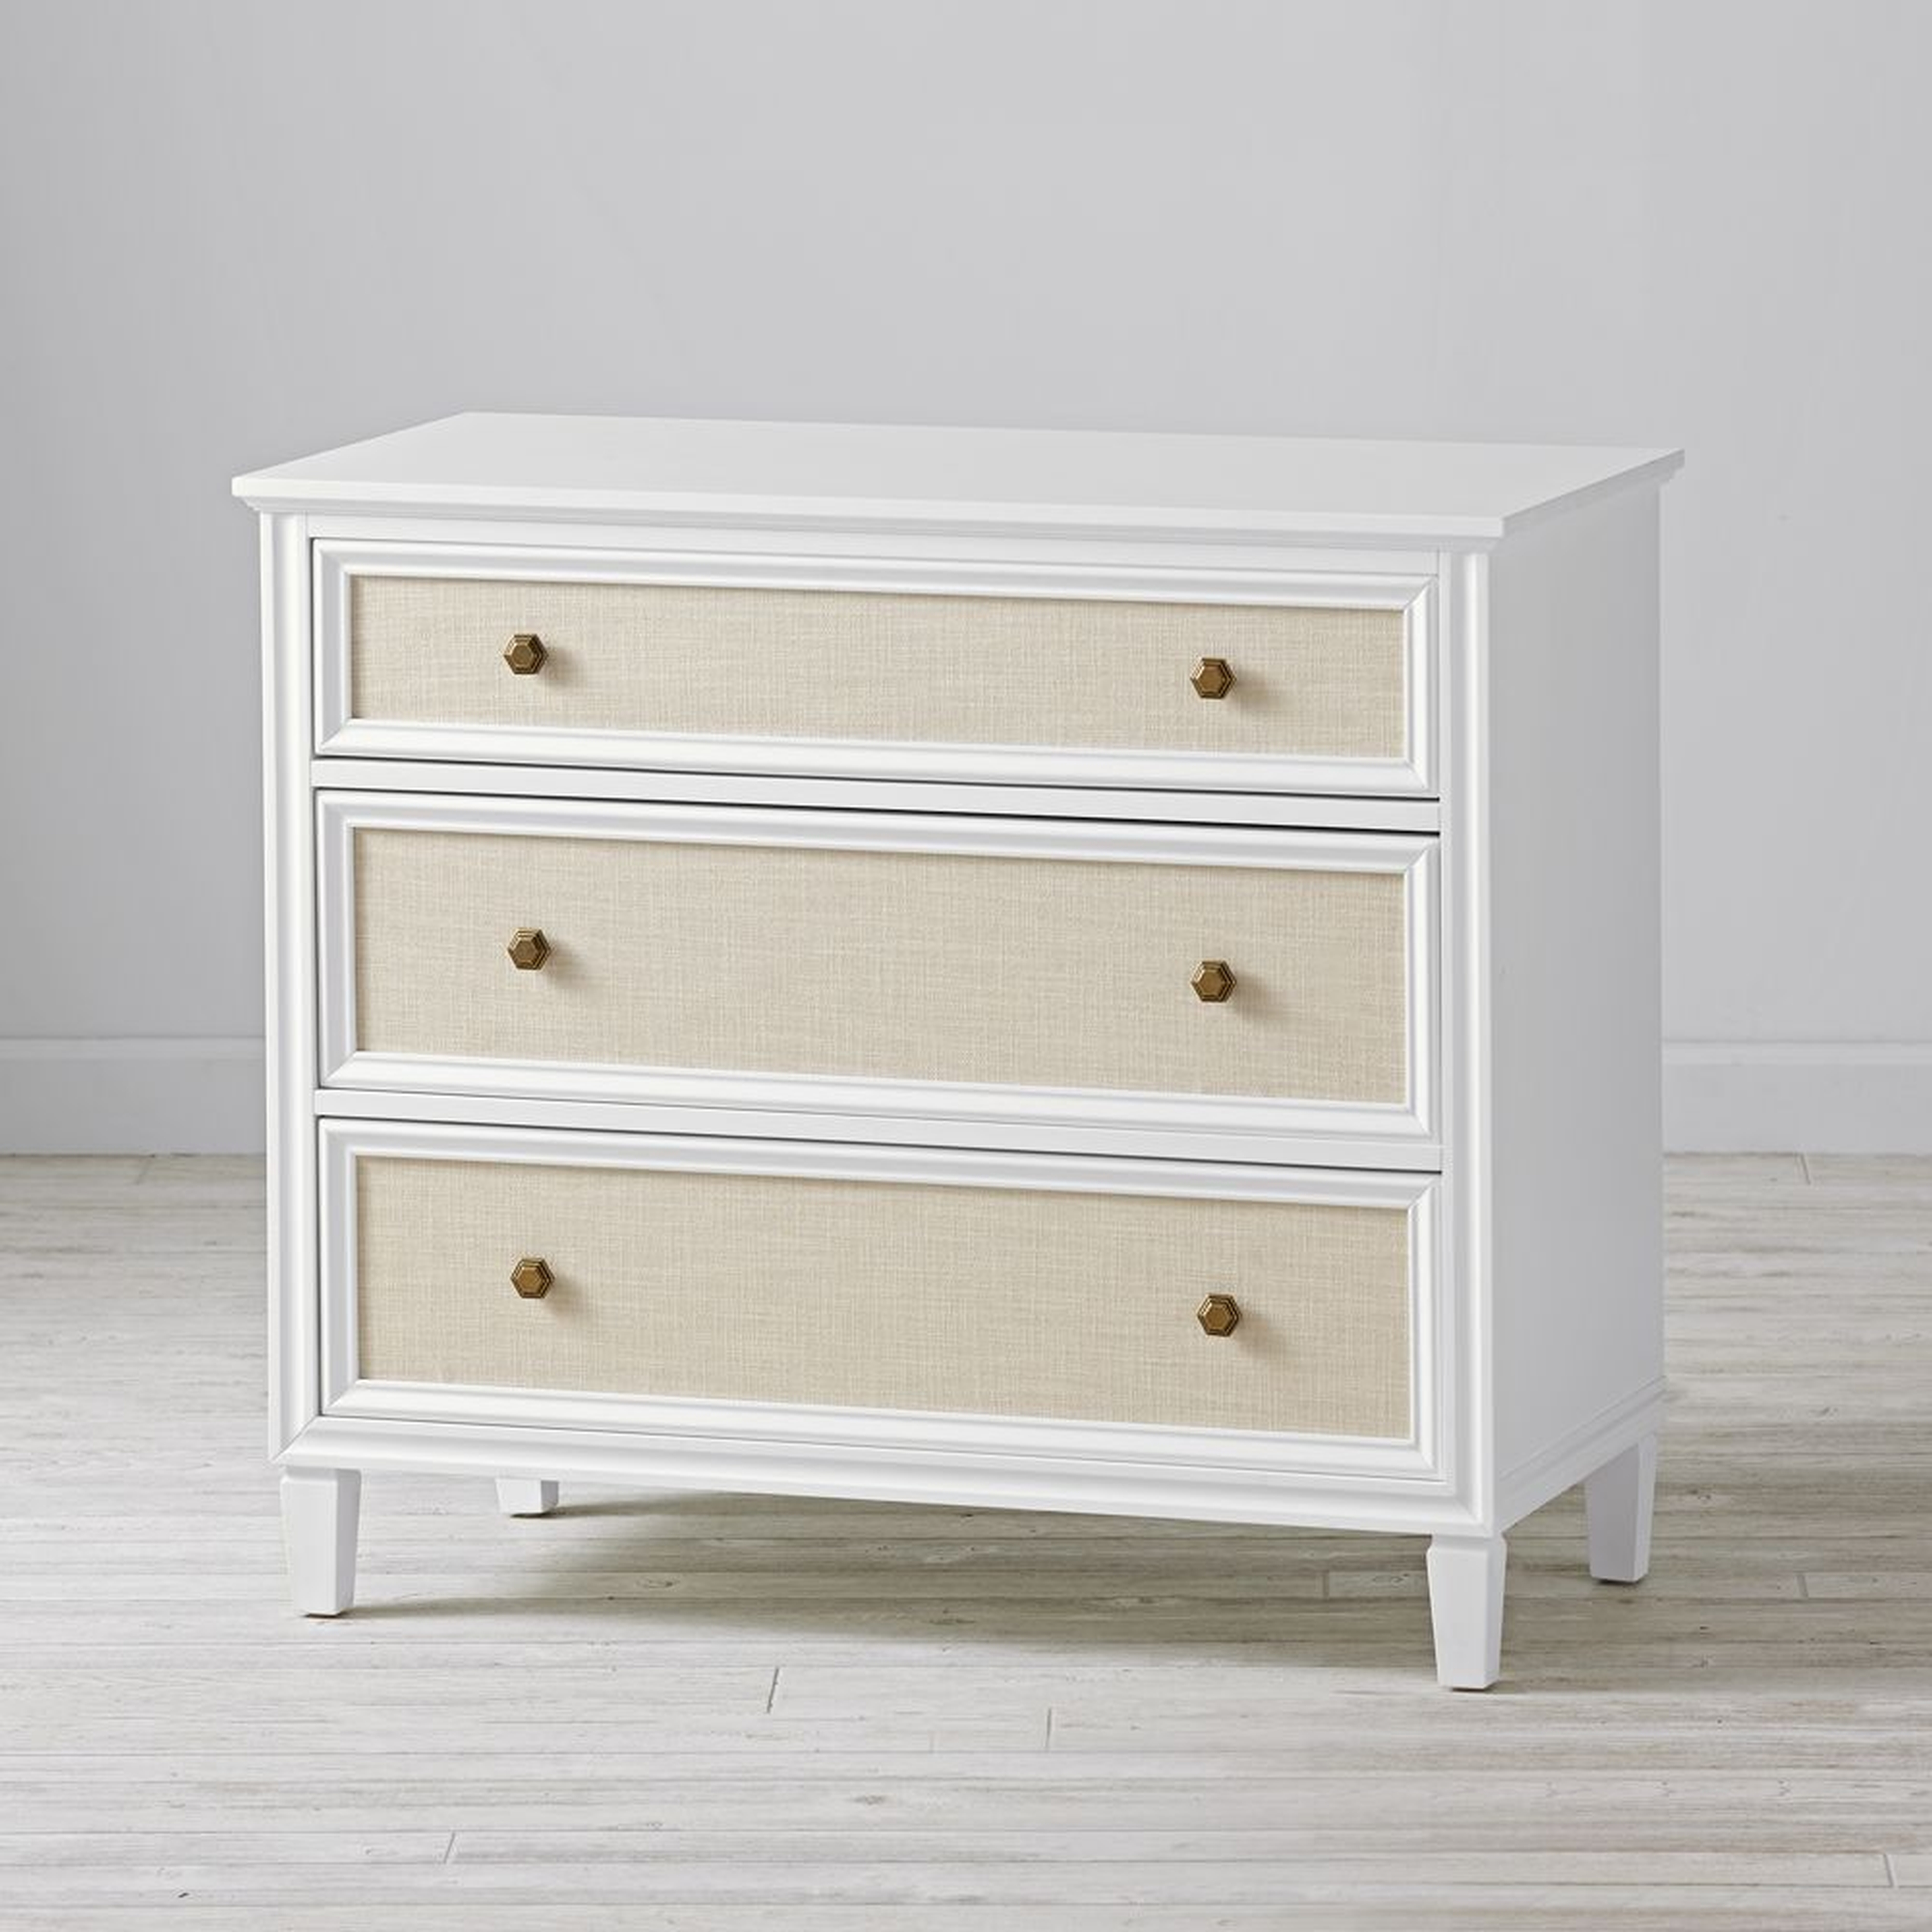 Kids Harmony 3-Drawer White Dresser - Crate and Barrel